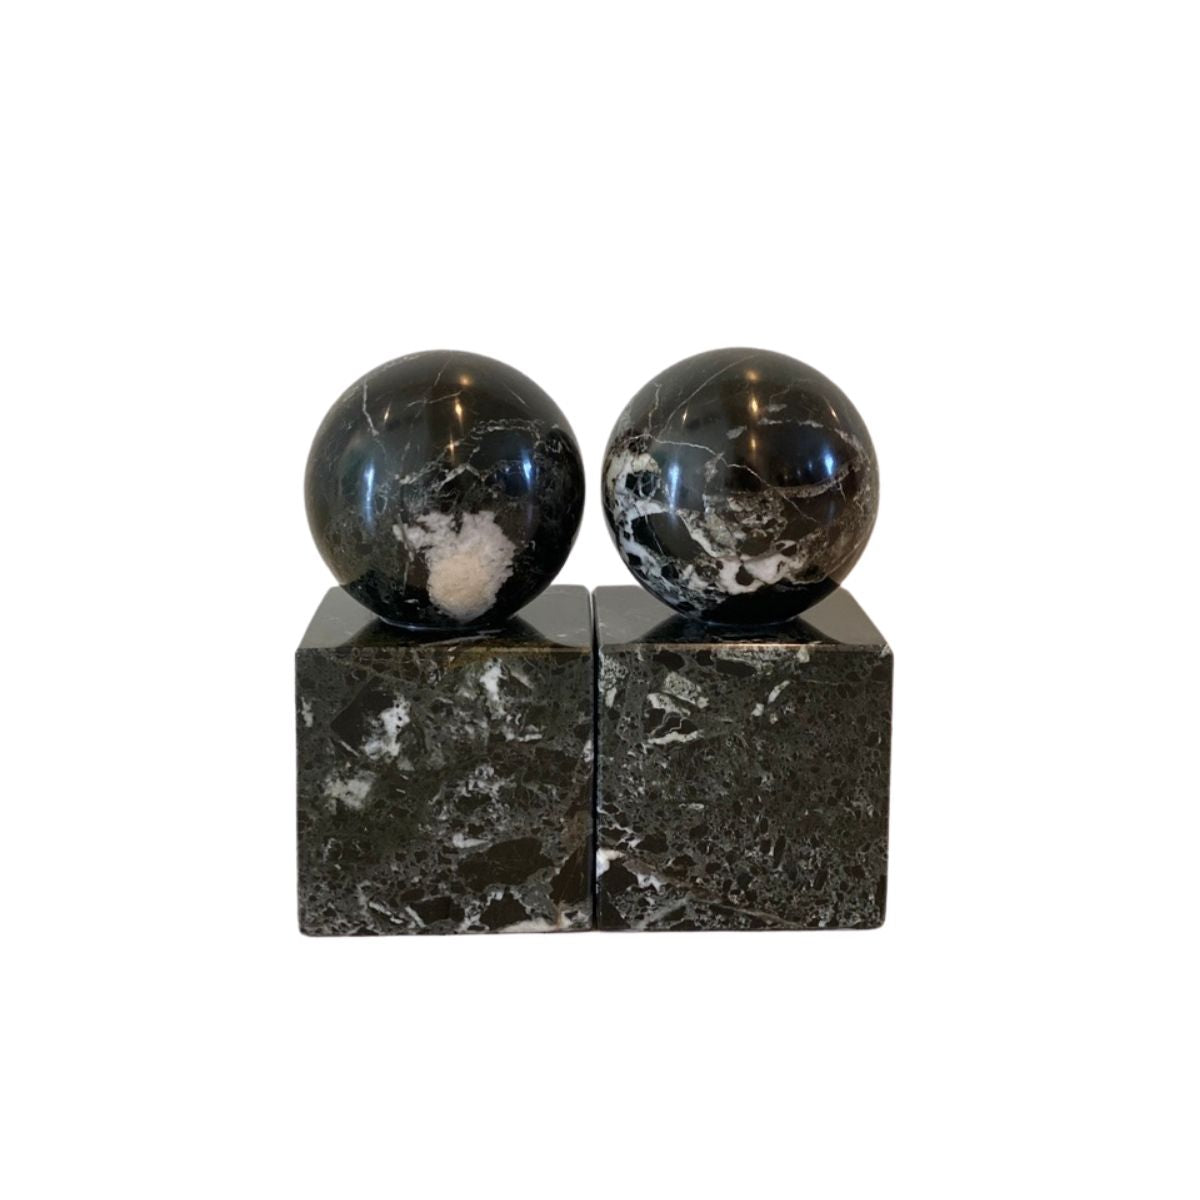 Black Polished Marble Bookends